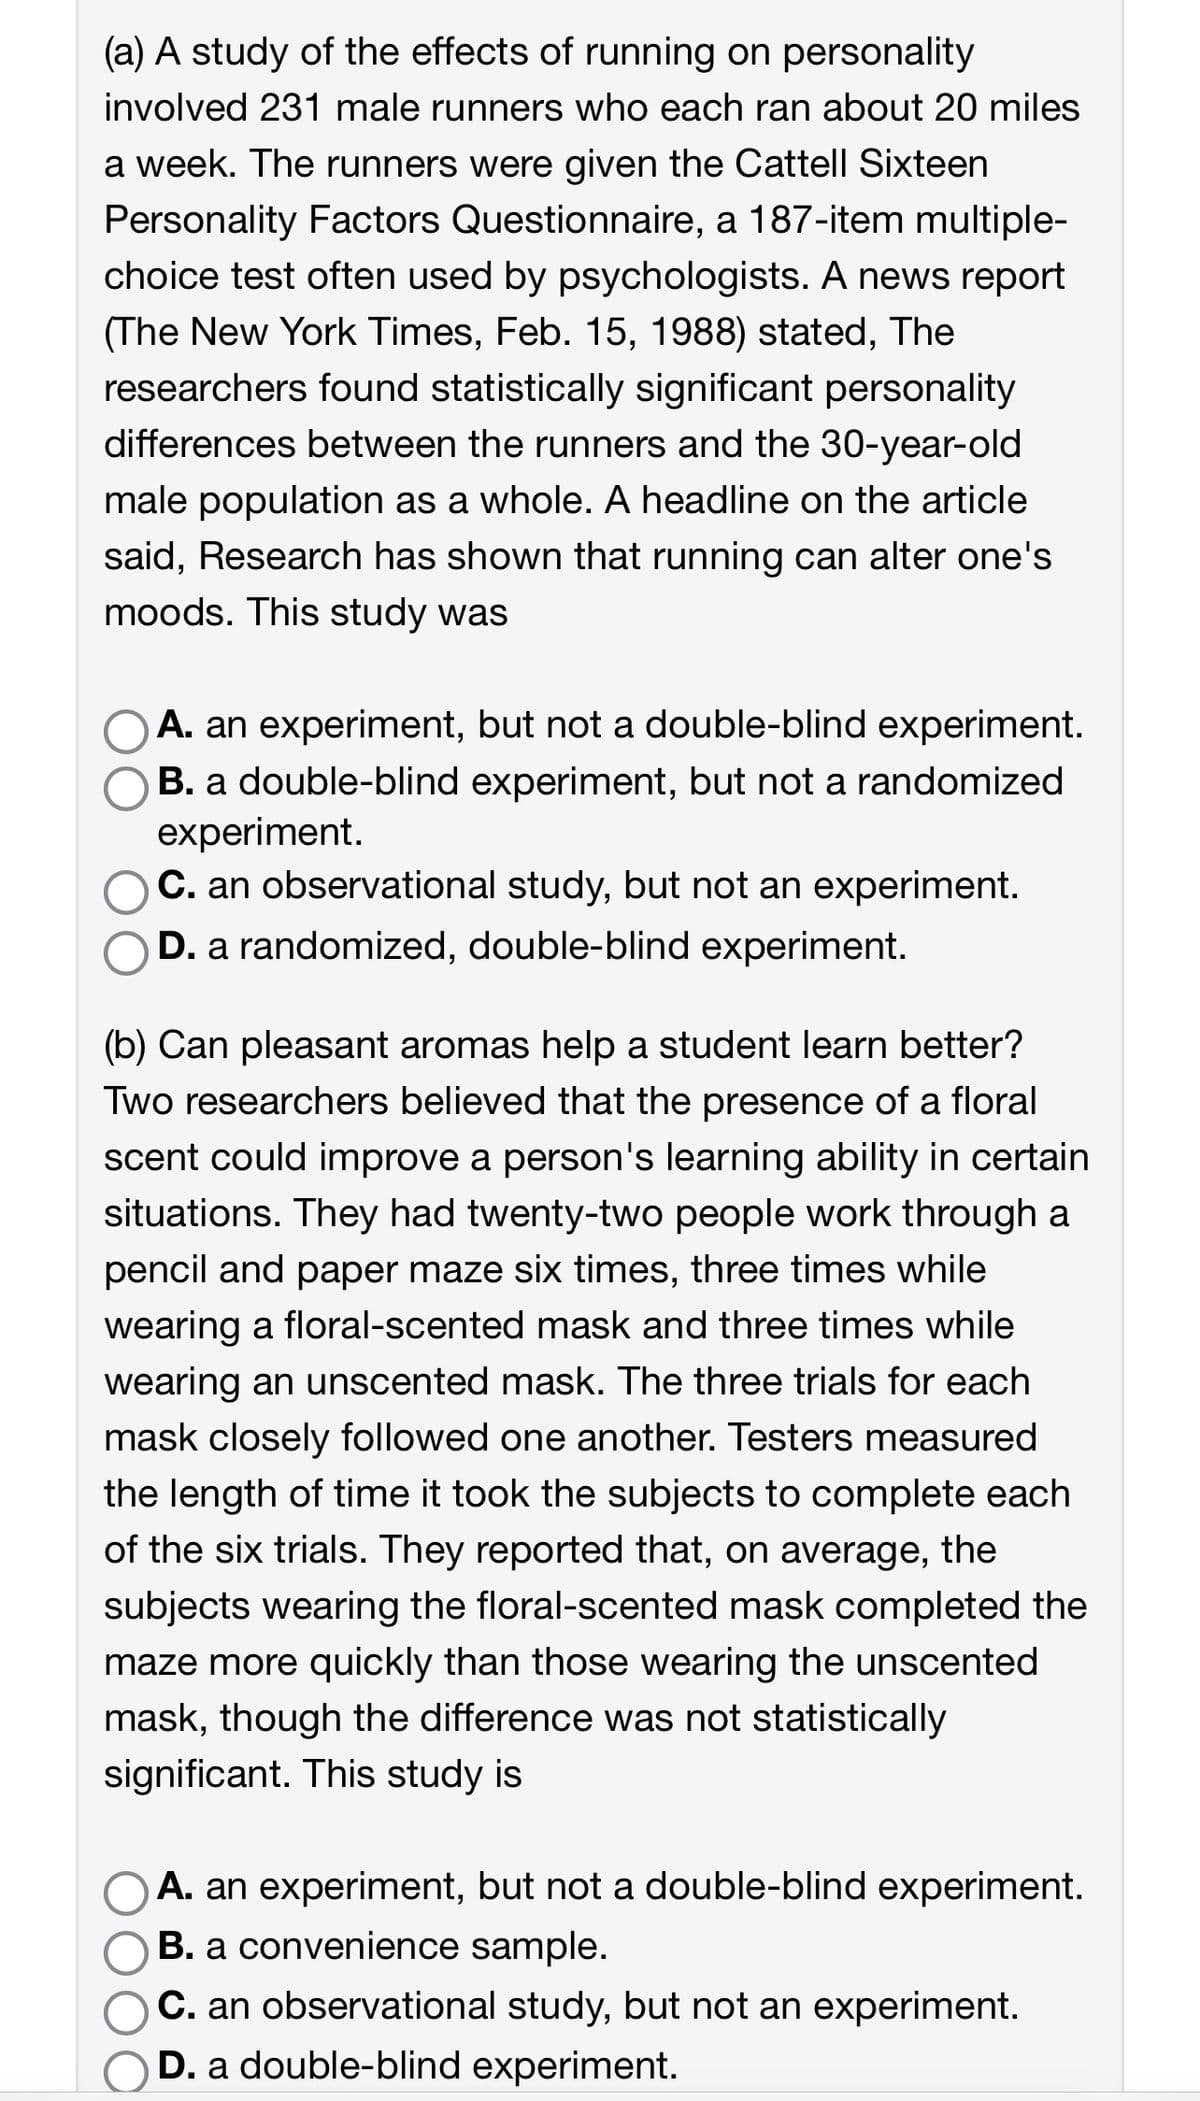 (a) A study of the effects of running on personality
involved 231 male runners who each ran about 20 miles
a week. The runners were given the Cattell Sixteen
Personality Factors Questionnaire, a 187-item multiple-
choice test often used by psychologists. A news report
(The New York Times, Feb. 15, 1988) stated, The
researchers found statistically significant personality
differences between the runners and the 30-year-old
male population as a whole. A headline on the article
said, Research has shown that running can alter one's
moods. This study was
A. an experiment, but not a double-blind experiment.
B. a double-blind experiment, but not a randomized
experiment.
C. an observational study, but not an experiment.
D. a randomized, double-blind experiment.
(b) Can pleasant aromas help a student learn better?
Two researchers believed that the presence of a floral
scent could improve a person's learning ability in certain
situations. They had twenty-two people work through a
pencil and paper maze six times, three times while
wearing a floral-scented mask and three times while
wearing an unscented mask. The three trials for each
mask closely followed one another. Testers measured
the length of time it took the subjects to complete each
of the six trials. They reported that, on average, the
subjects wearing the floral-scented mask completed the
maze more quickly than those wearing the unscented
mask, though the difference was not statistically
significant. This study is
A. an experiment, but not a double-blind experiment.
B. a convenience sample.
C. an observational study, but not an experiment.
D. a double-blind experiment.